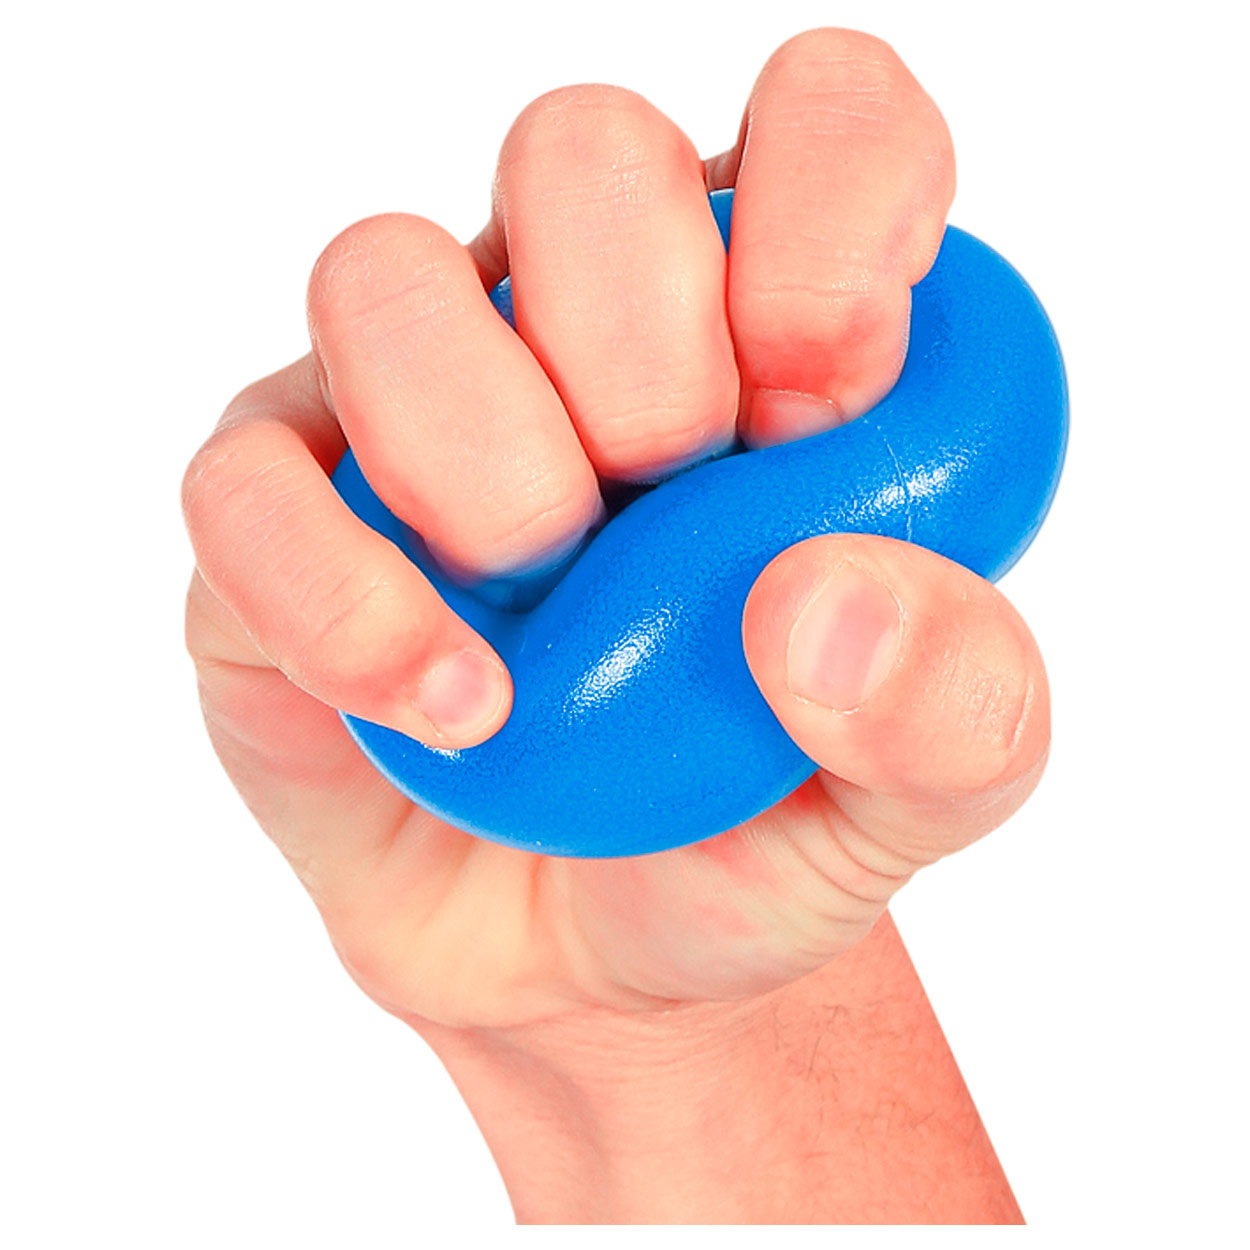 TOGU anti-stress ball inflated with air, Ø 6.5 cm buy online